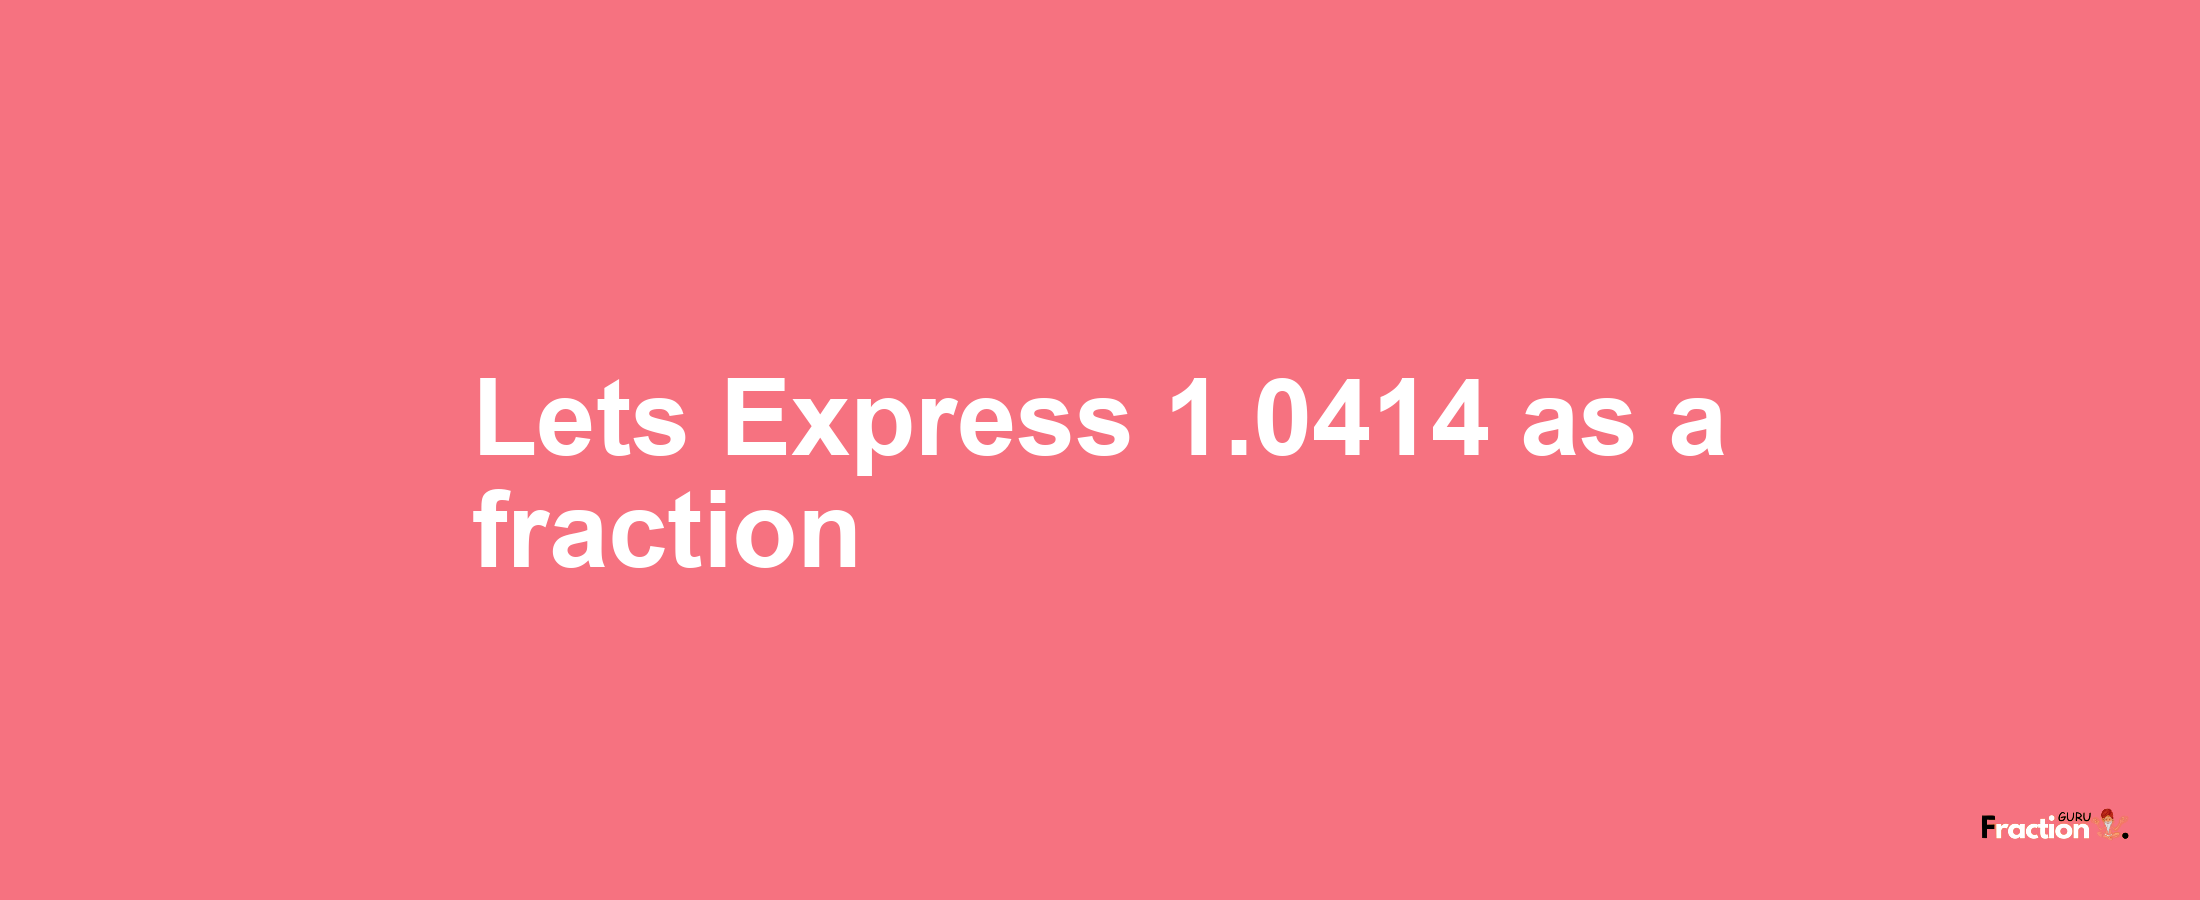 Lets Express 1.0414 as afraction